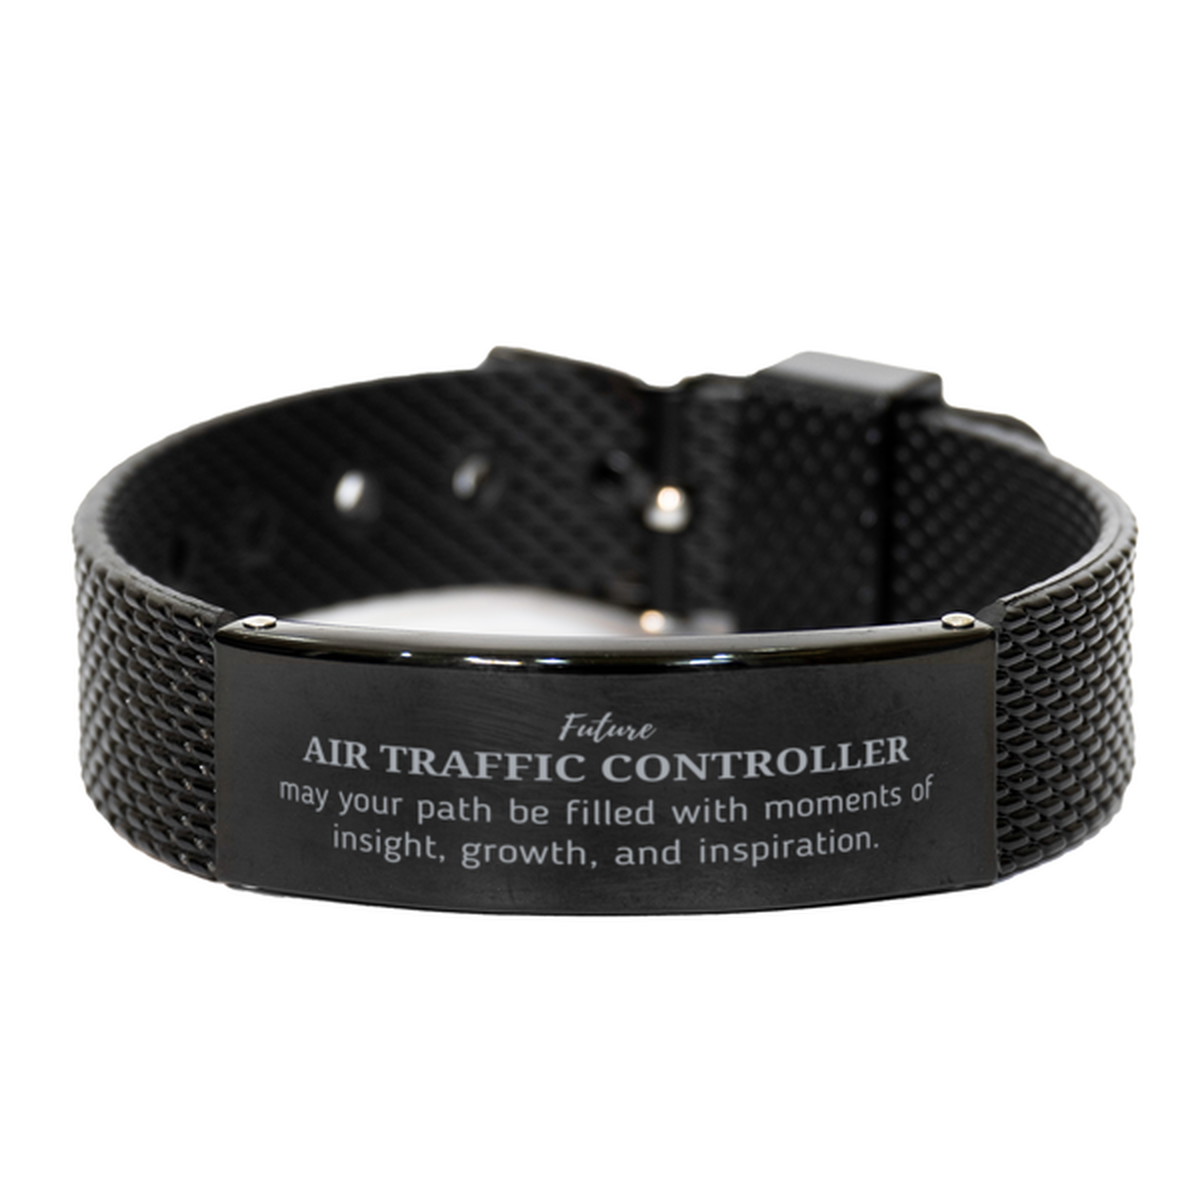 Future Air Traffic Controller Gifts, May your path be filled with moments of insight, Graduation Gifts for New Air Traffic Controller, Christmas Unique Black Shark Mesh Bracelet For Men, Women, Friends